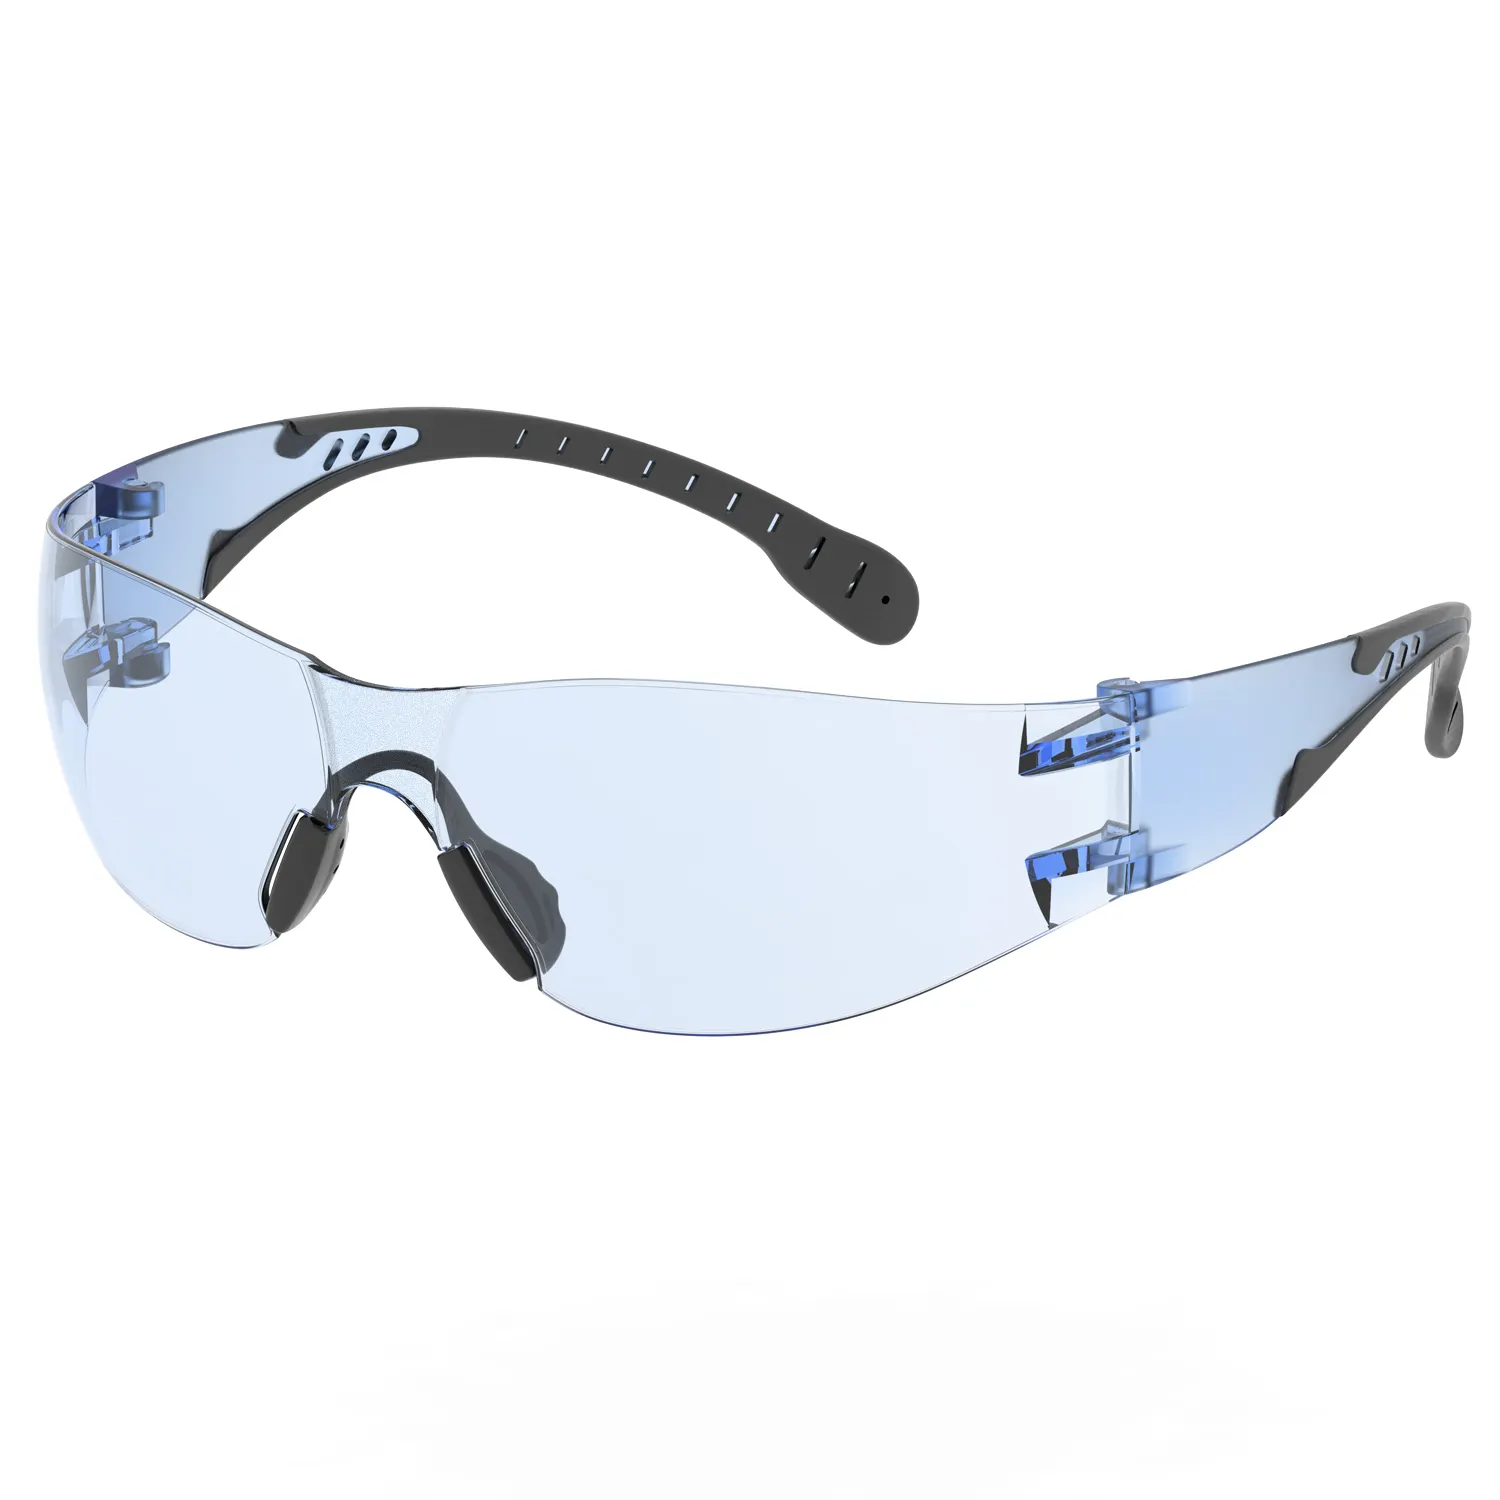 J Y Hot Sell Blue Lens Anti Fog High Quality Safety Work Glasses Eye Protection Goggles